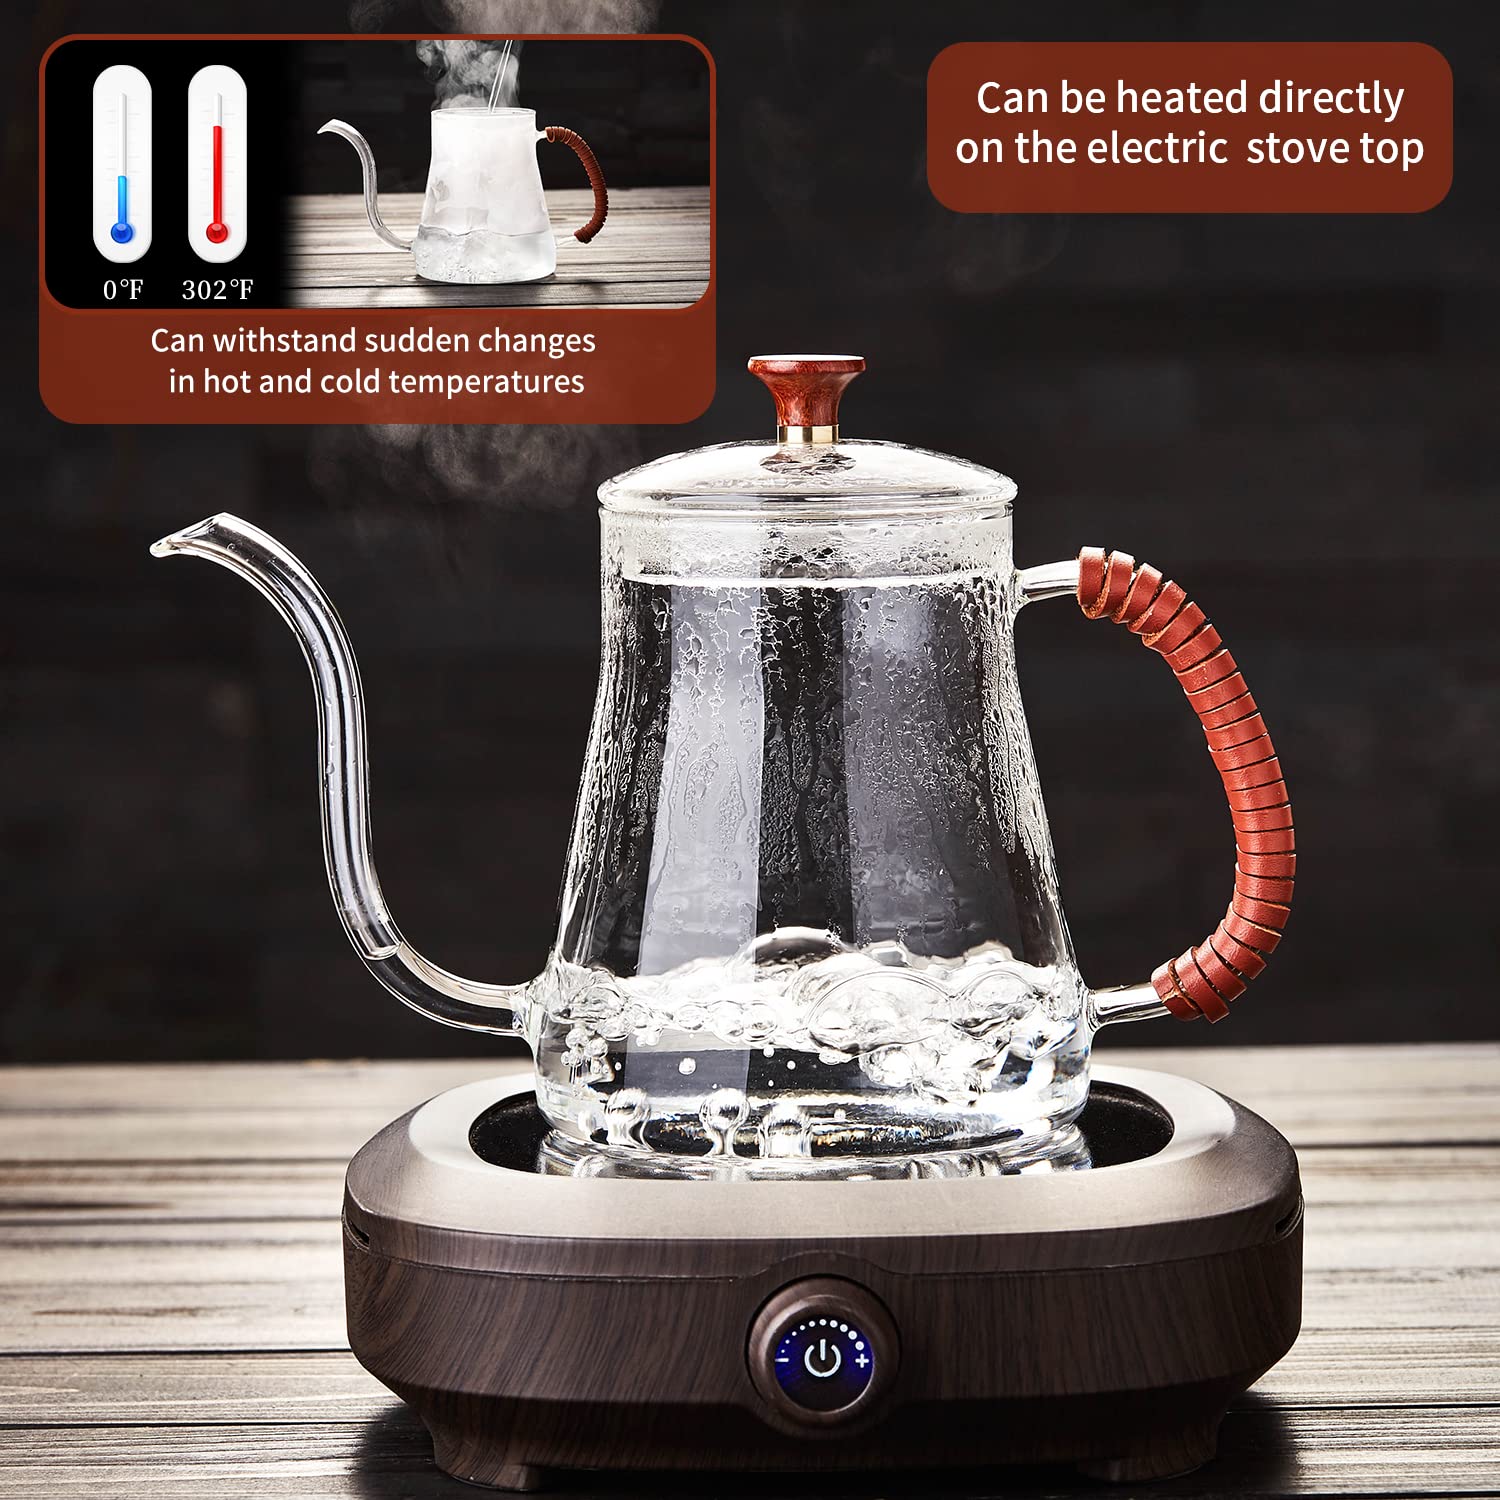 Unbreakable Gooseneck Kettle for Drip Coffee 20OZ Pour Over Coffee Kettle Tea Kettle for Stove Top,600ml/20oz Glass Coffee Kettle with Lid,Water Kettle Coffee Pot